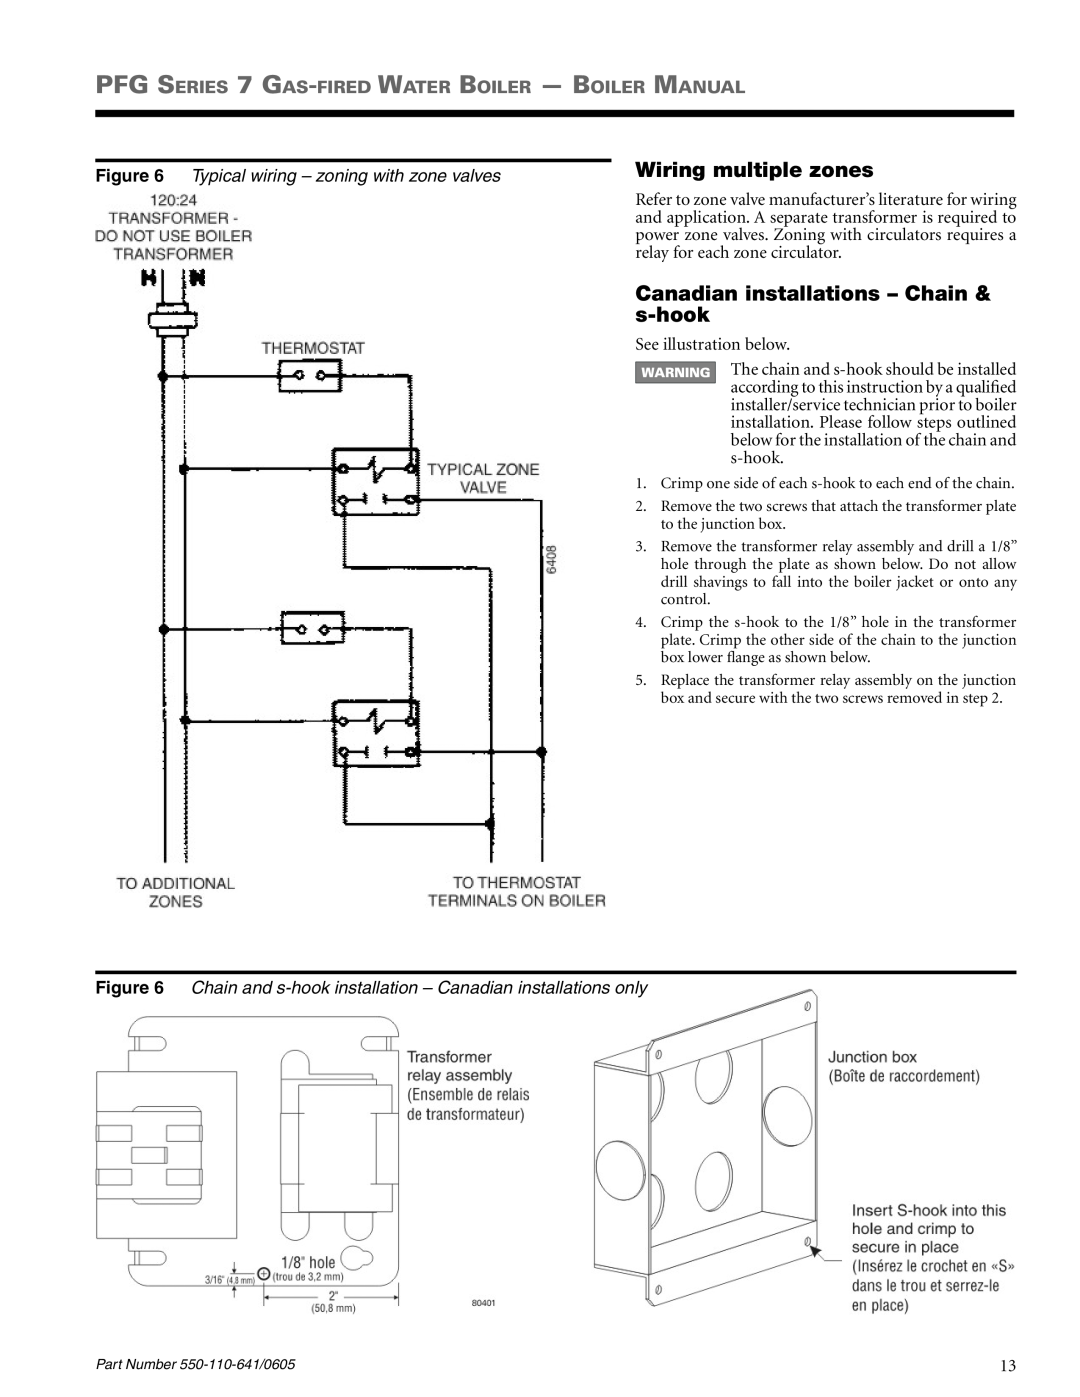 Weil-McLain PFG-7 Wiring multiple zones, Canadian installations - Chain & s-hook, Typical wiring - zoning with zone valves 